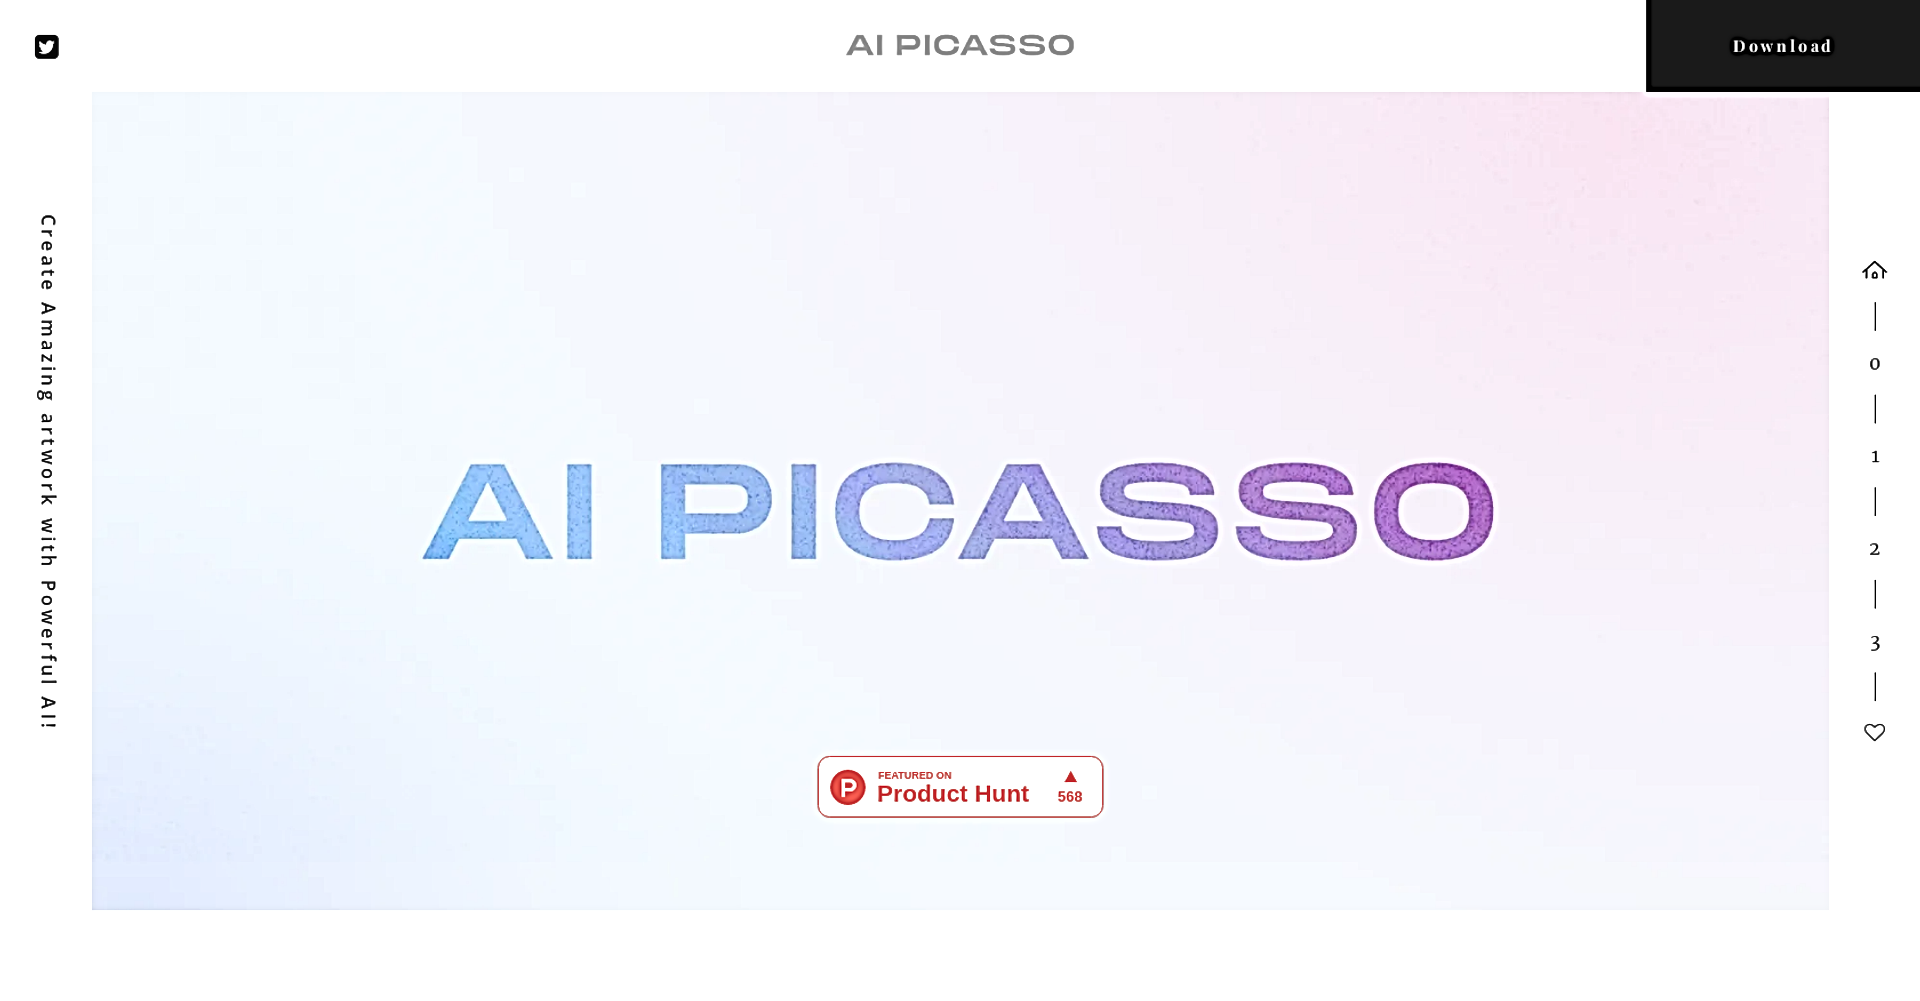 AI Picasso featured